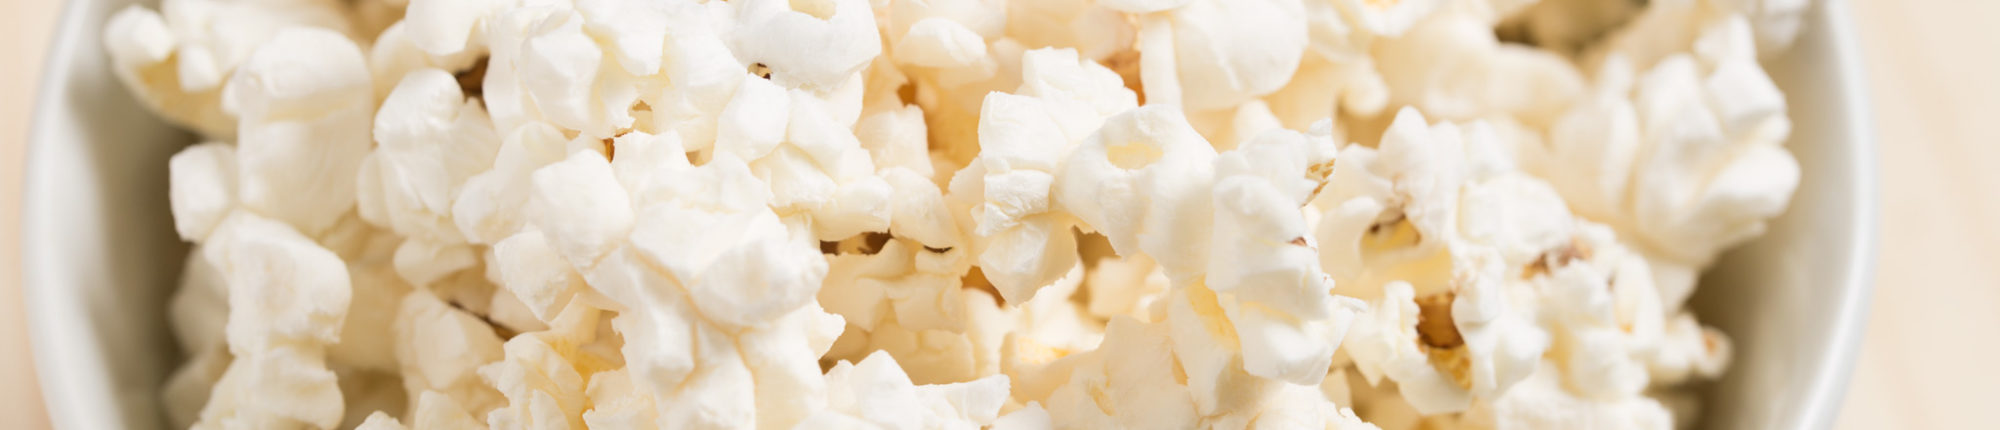 Extreme close-up of popcorn in a white bowl